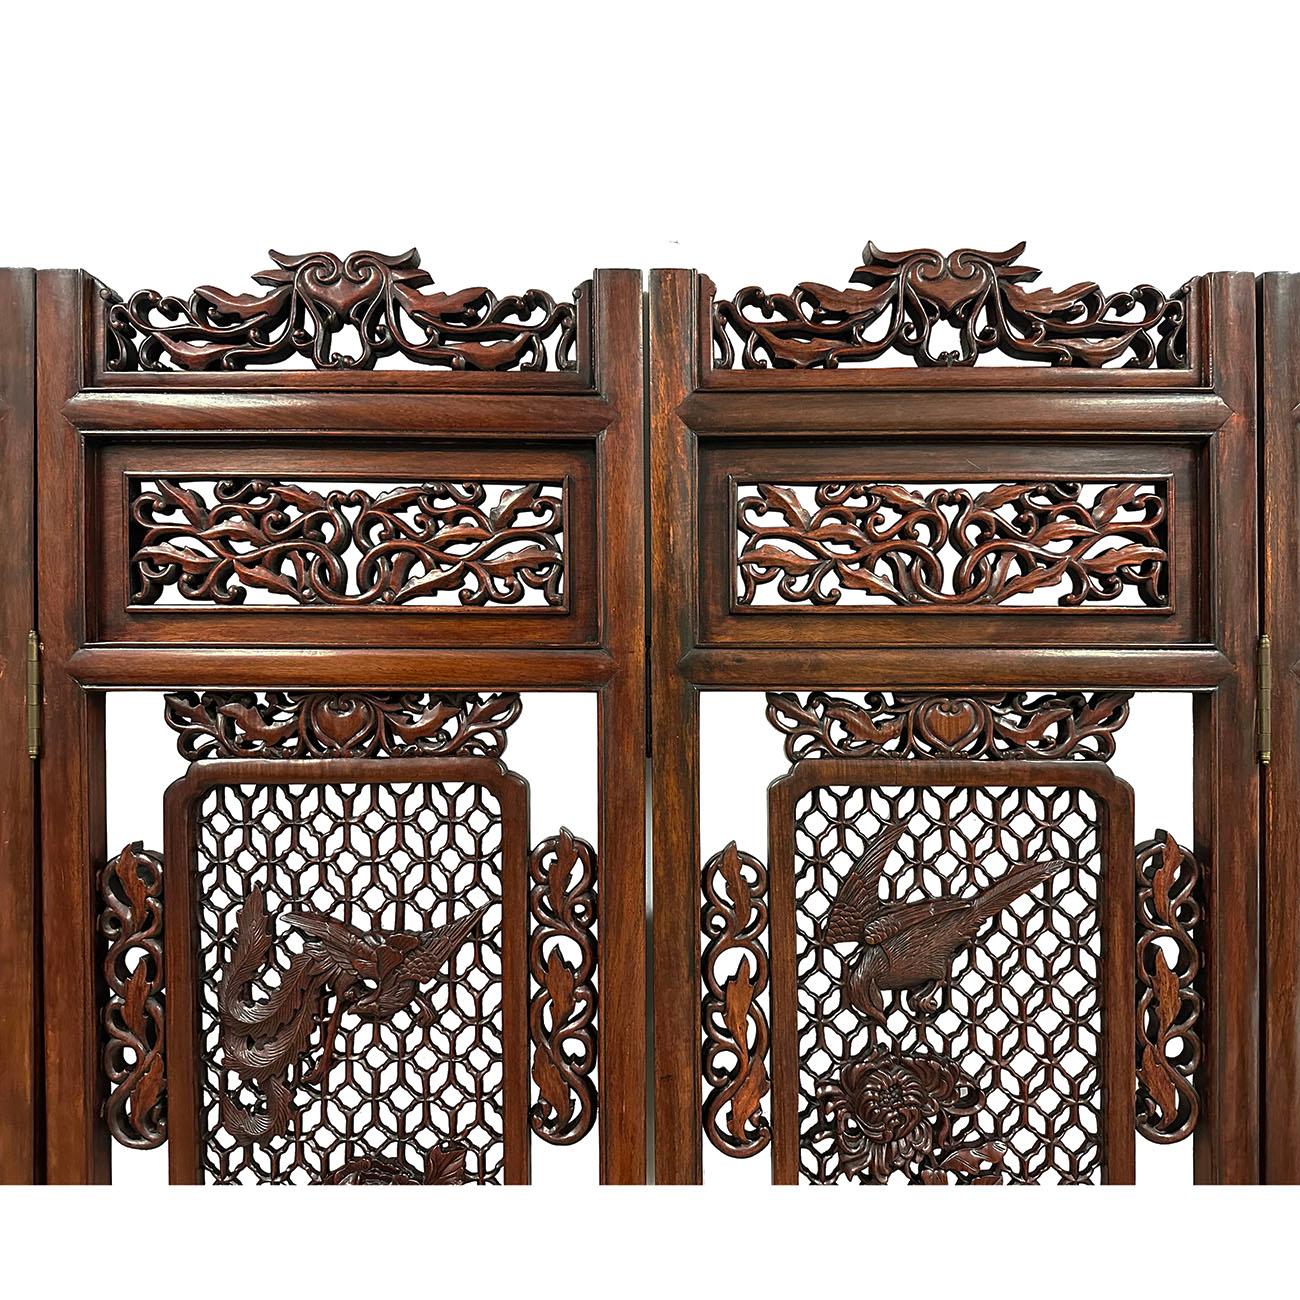 Mid-20th Century Chinese Rosewood Open Carved Screen/Room Divider For Sale 1